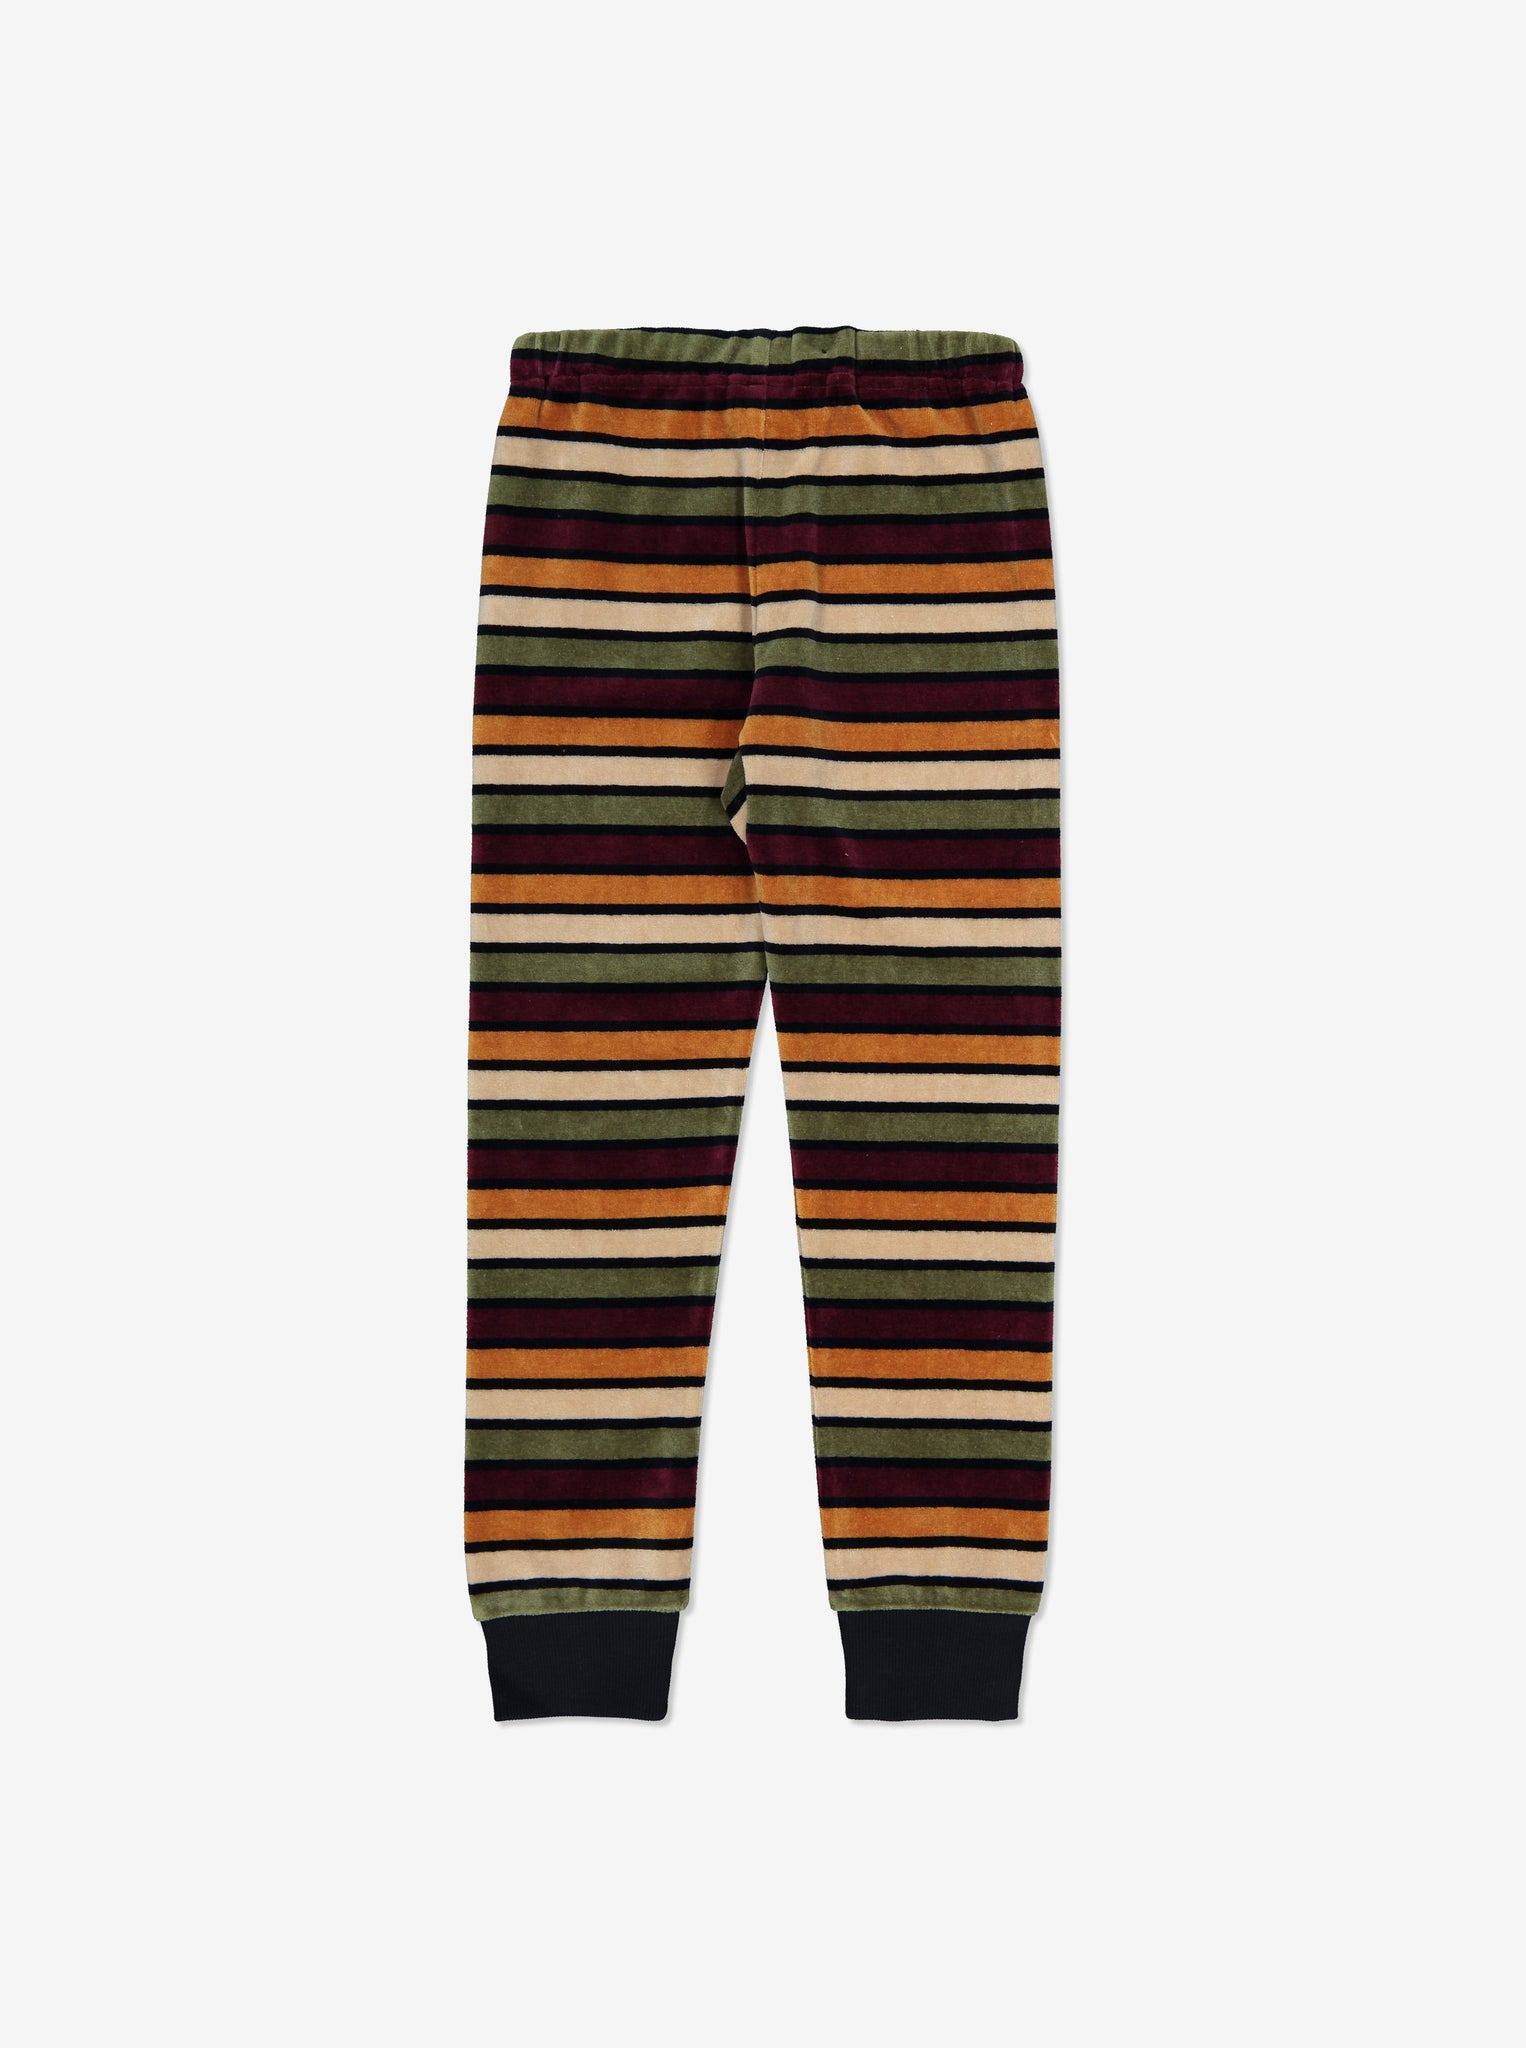 Unisex Navy Striped Velour Kids Trousers 1-8y